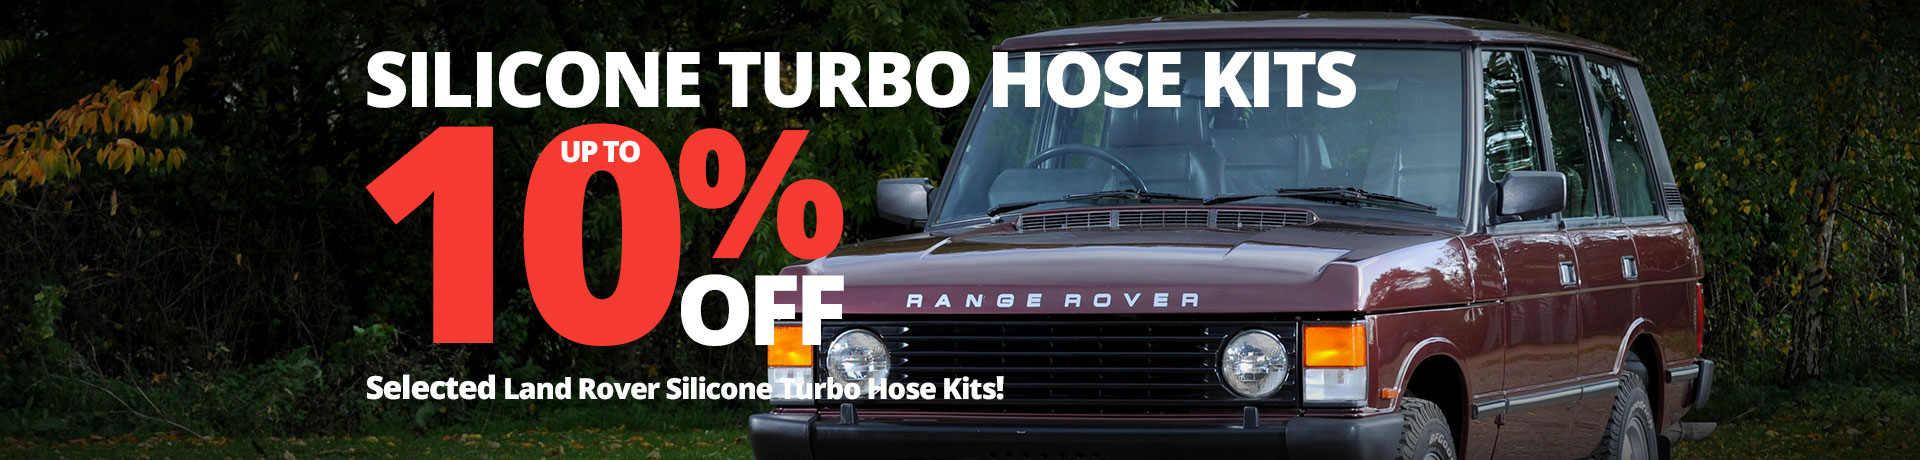 Up to 10% off Land Rover Silicone Turbo Hose Kits